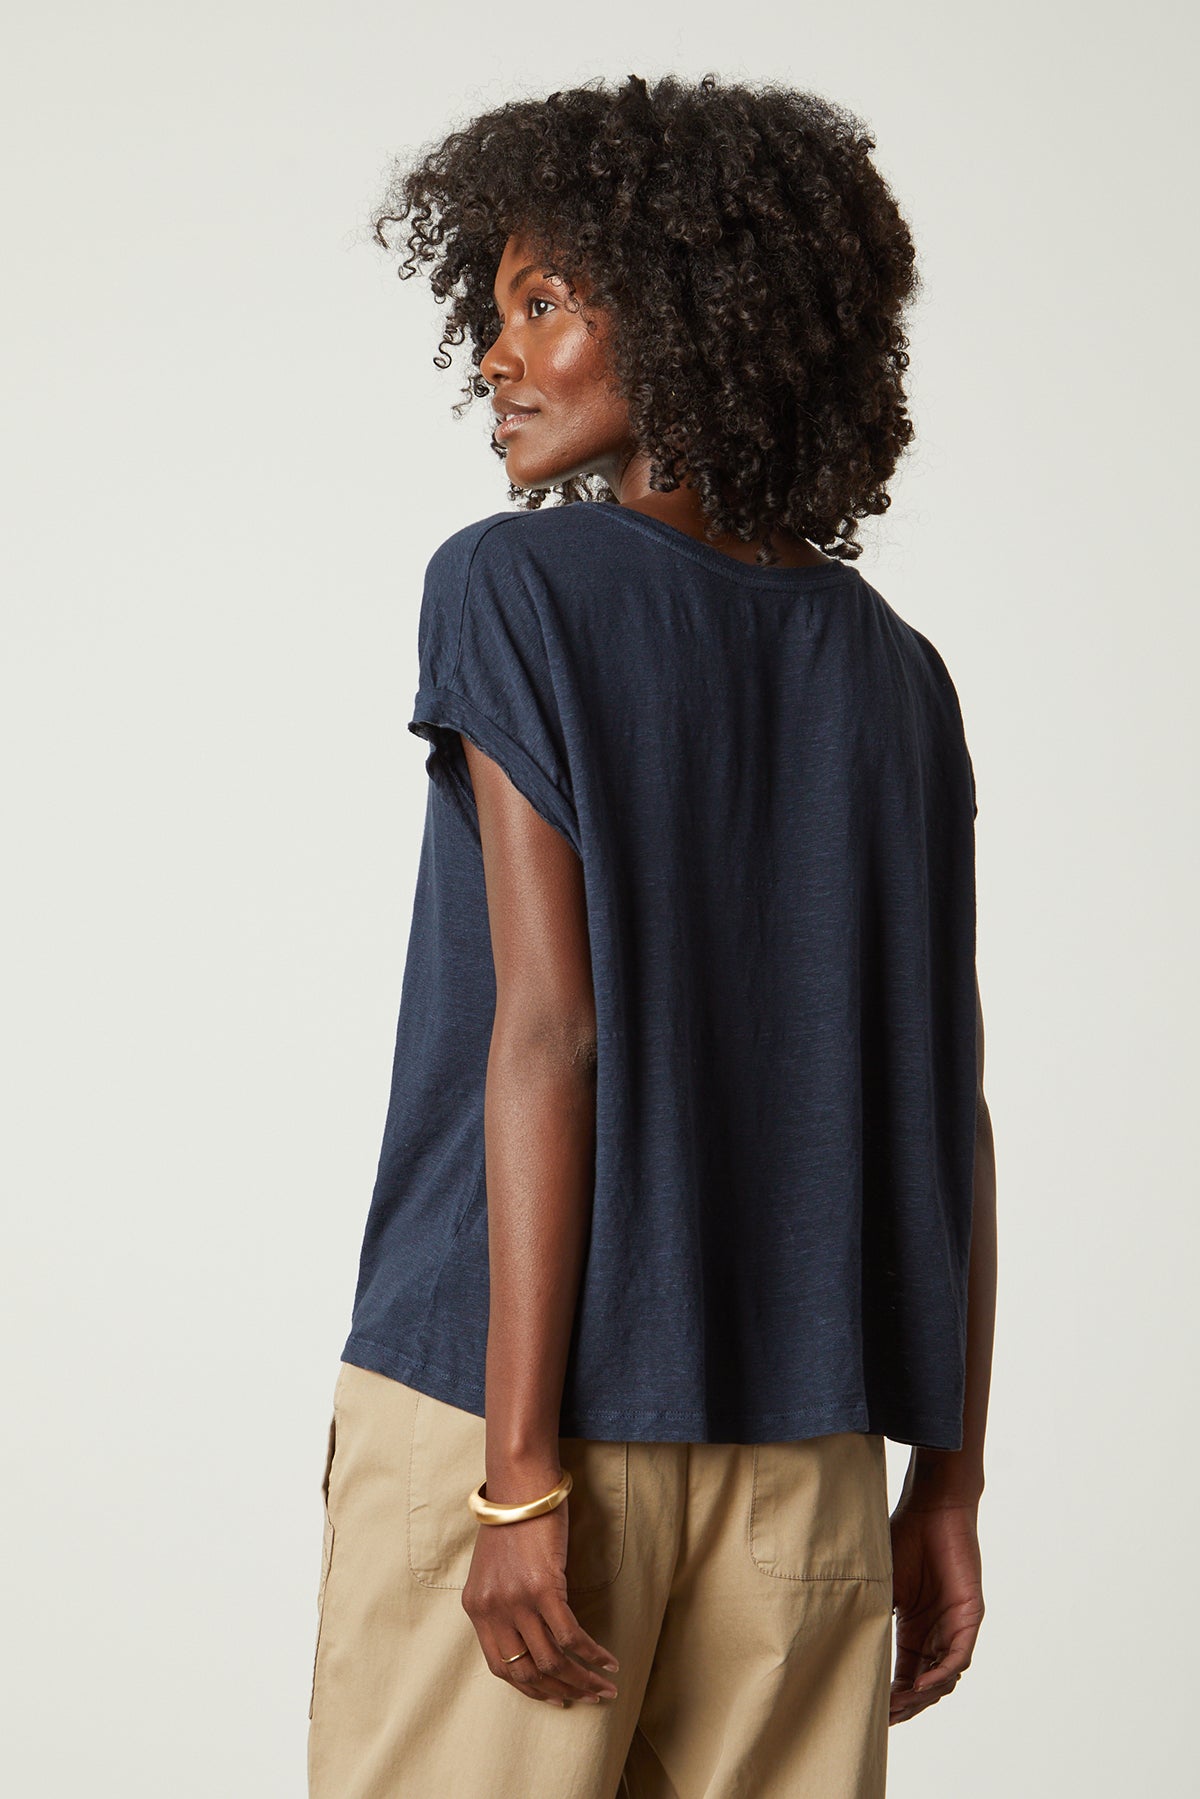 Hudson tee in baltic blue with Misty pant in oak back-26079092670657